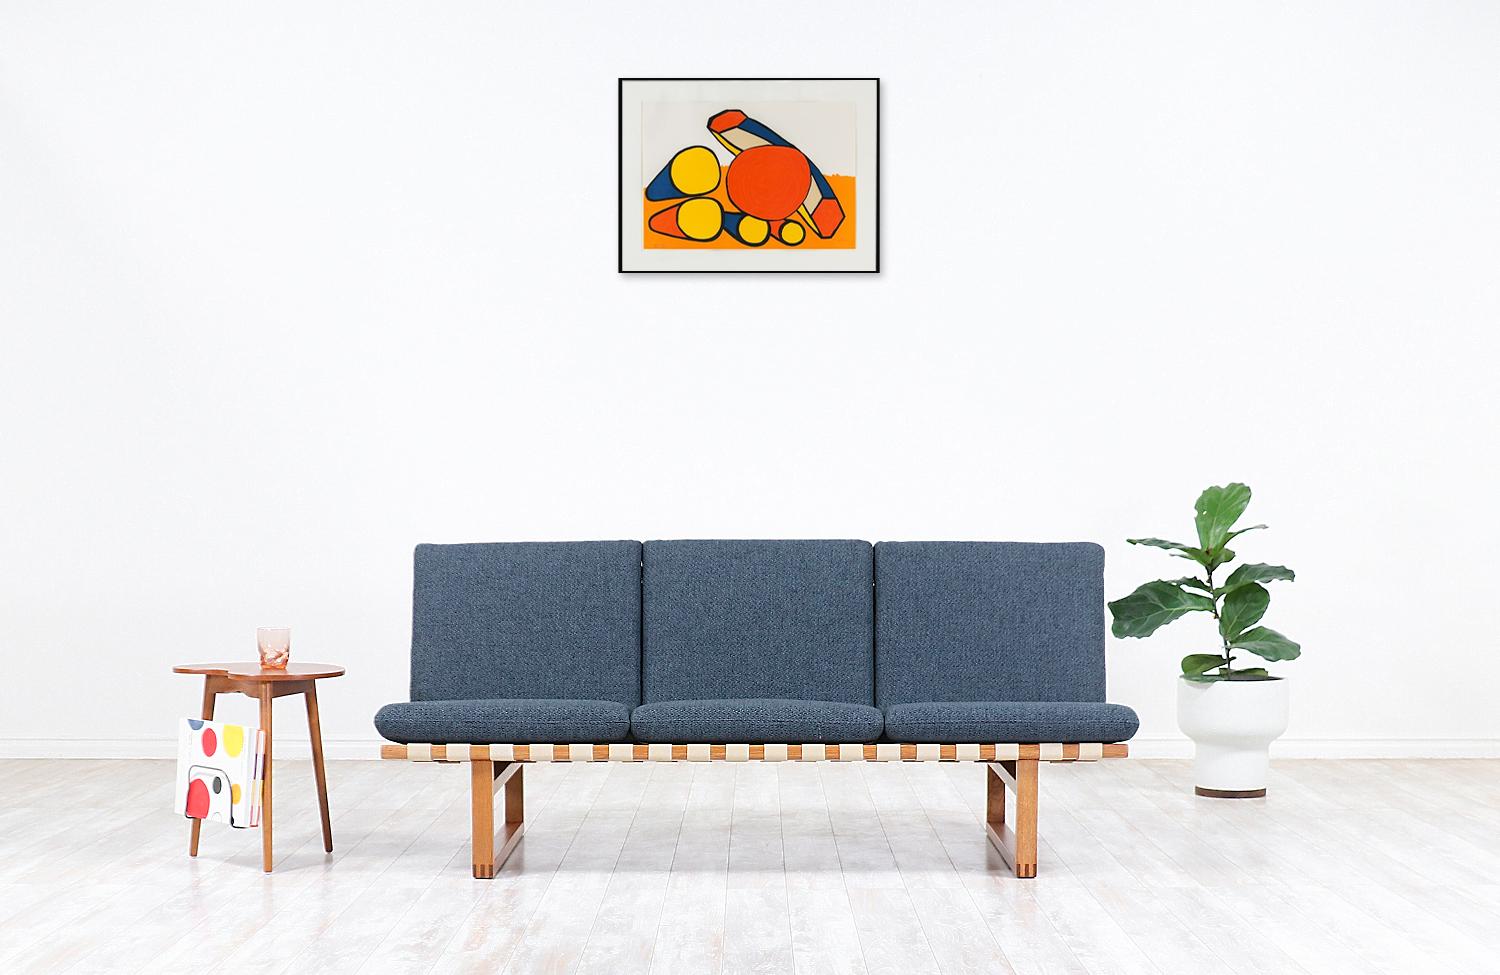 Early vintage model 211 sofa designed by brilliant Danish architect Børge Mogensen in collaboration with the workshop of Fredericia Stolefabrik in Denmark during the 1950s. Mogensen's philosophy for this line was servicing functionalism and comfort